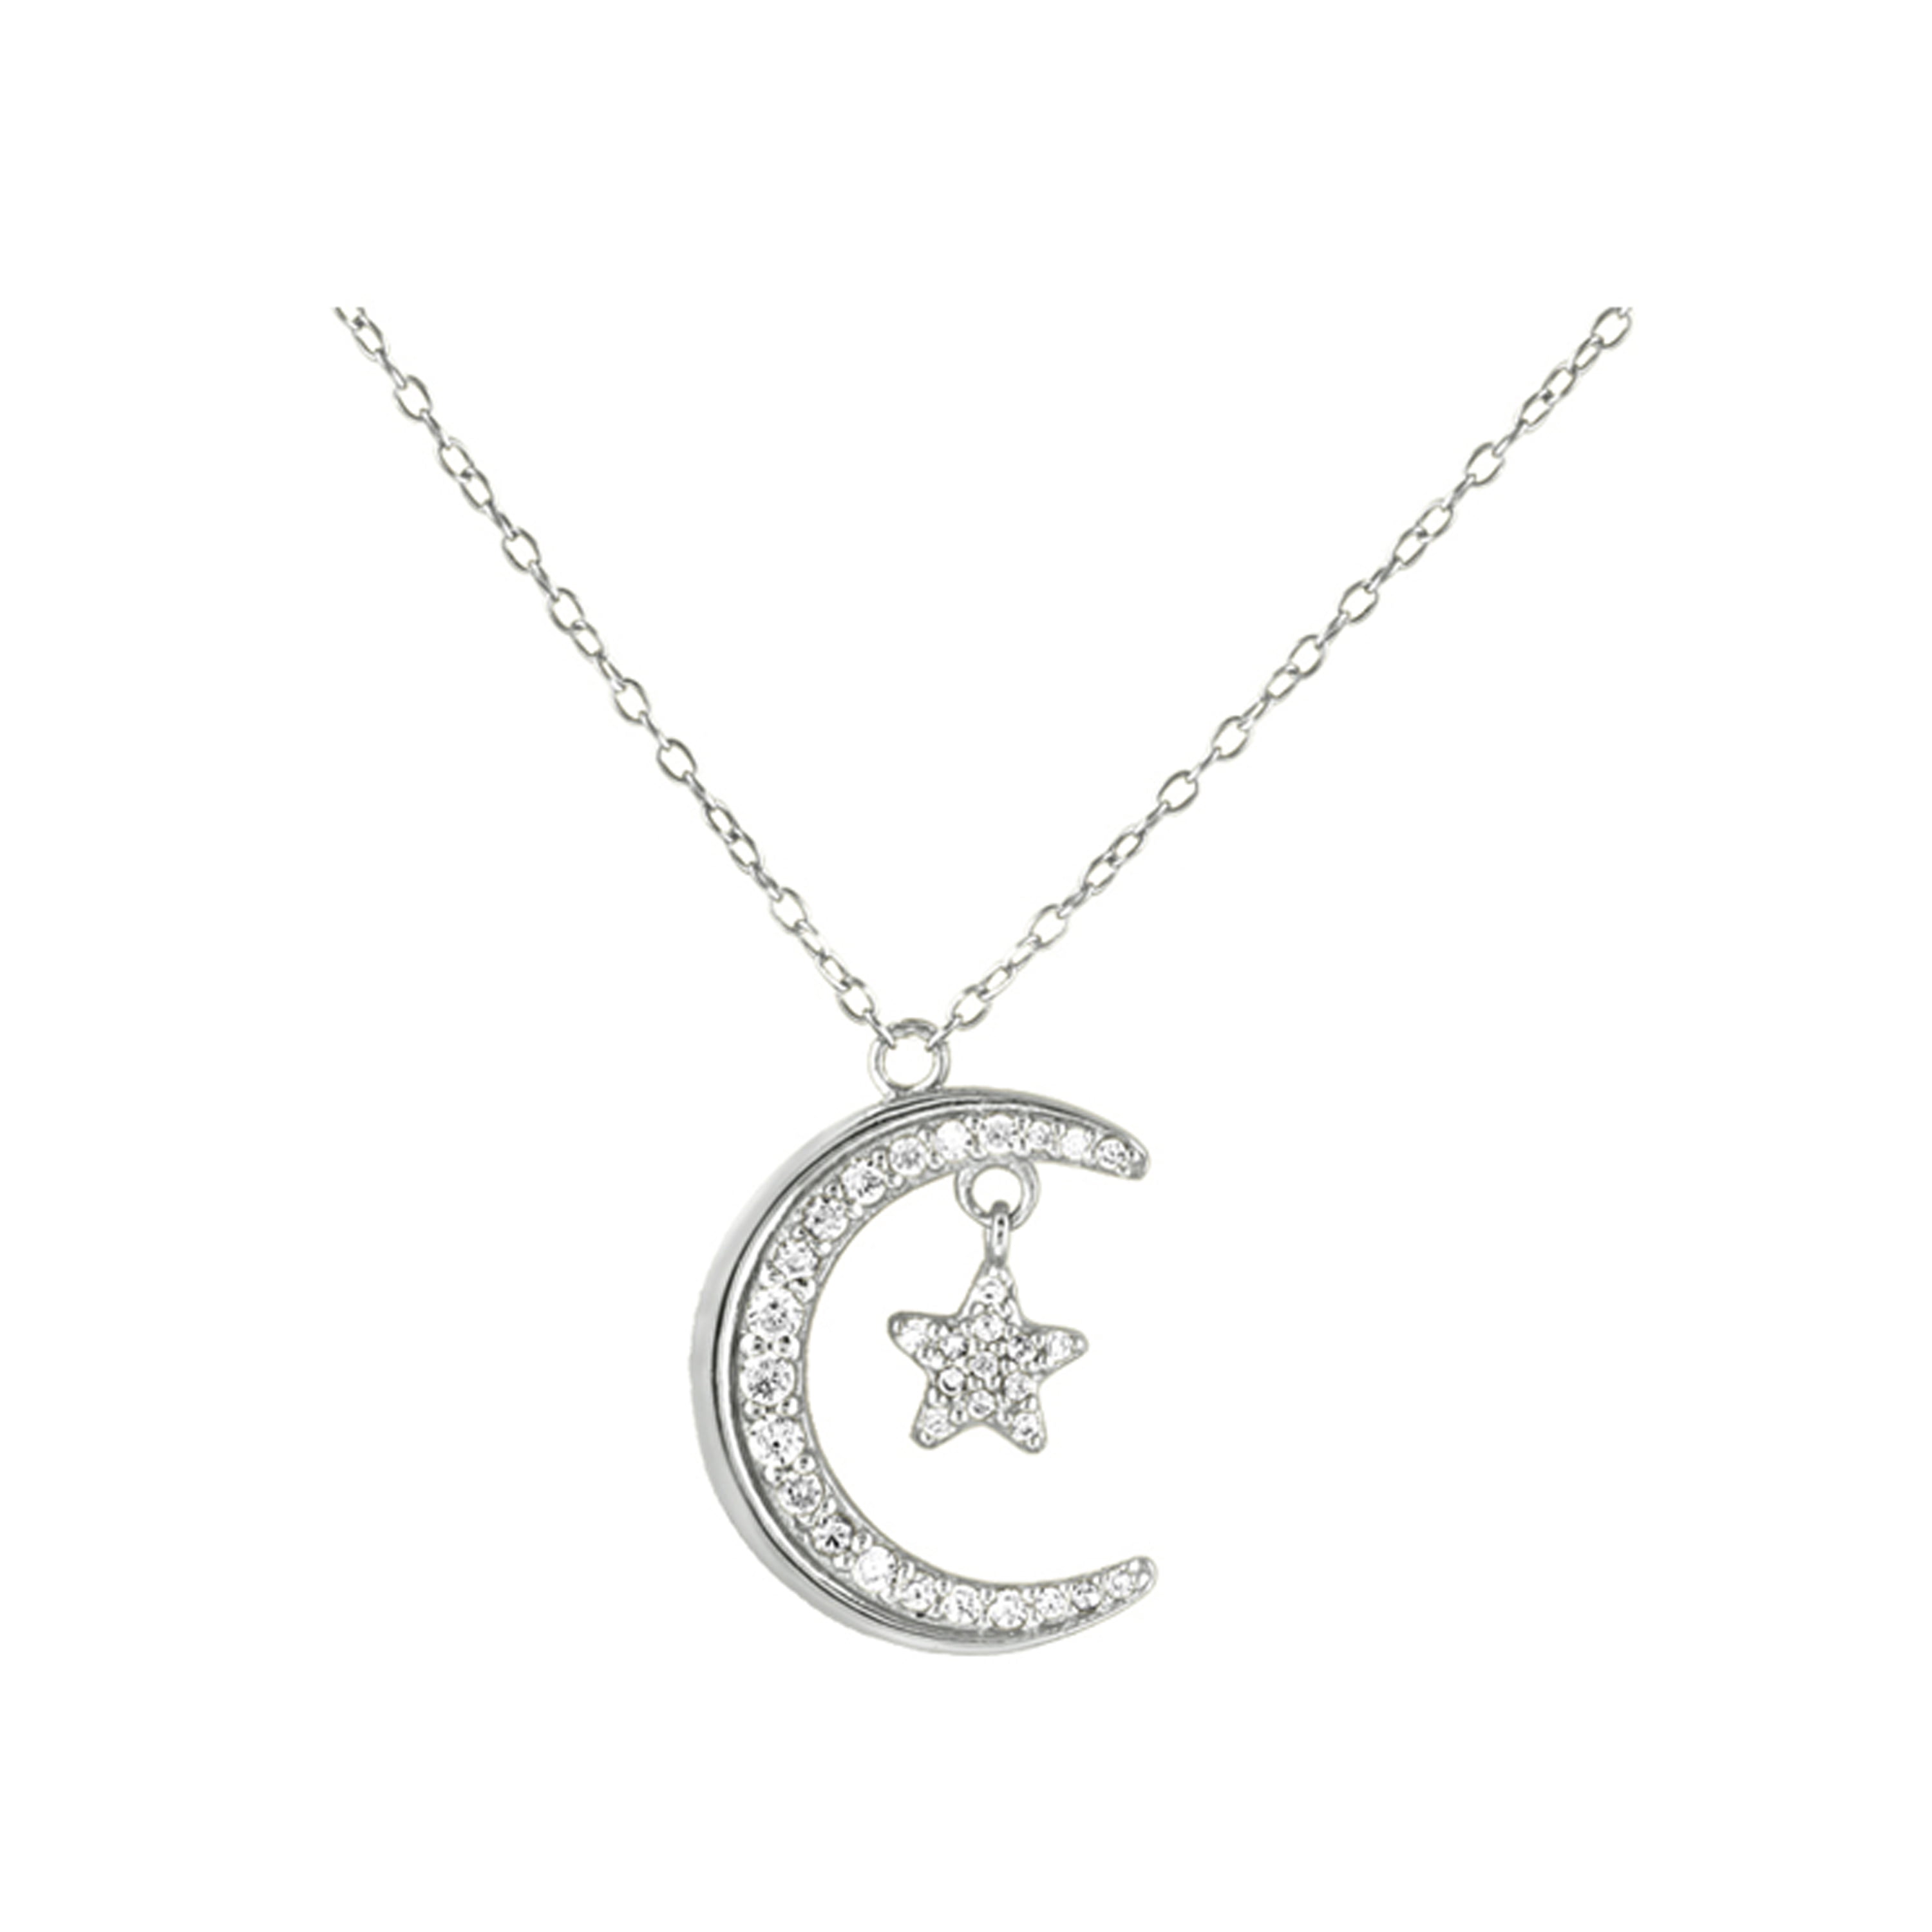 16 Length 925 Sterling Silver Rhodium-plated Celestial Moon with 2in ext Necklace 